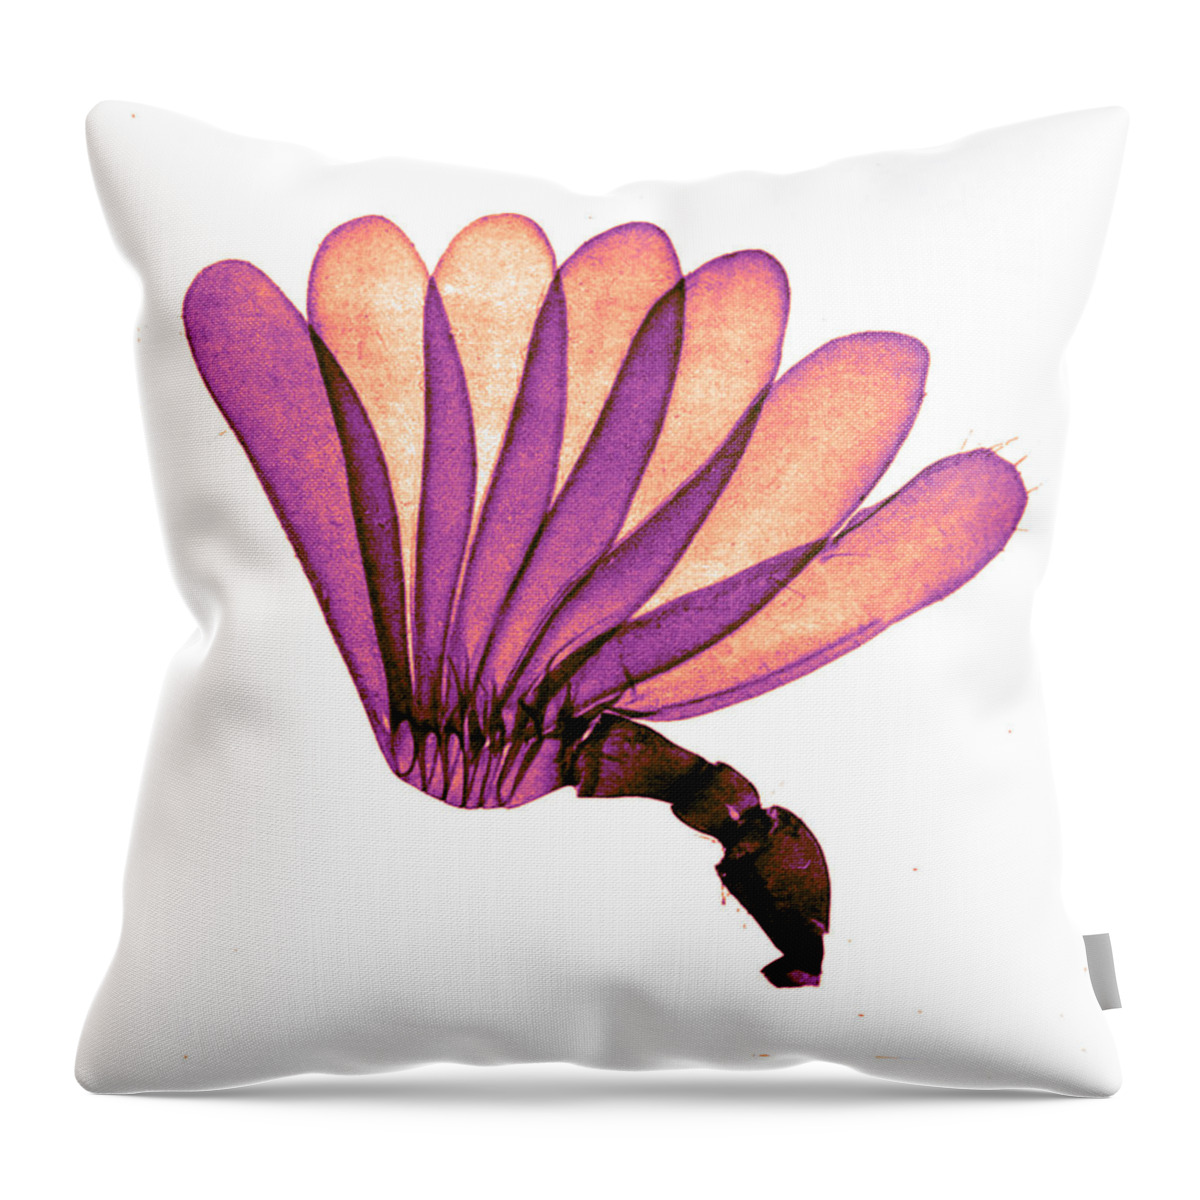 History Throw Pillow featuring the photograph Antenna Of Cockchafer, Early by Science Source